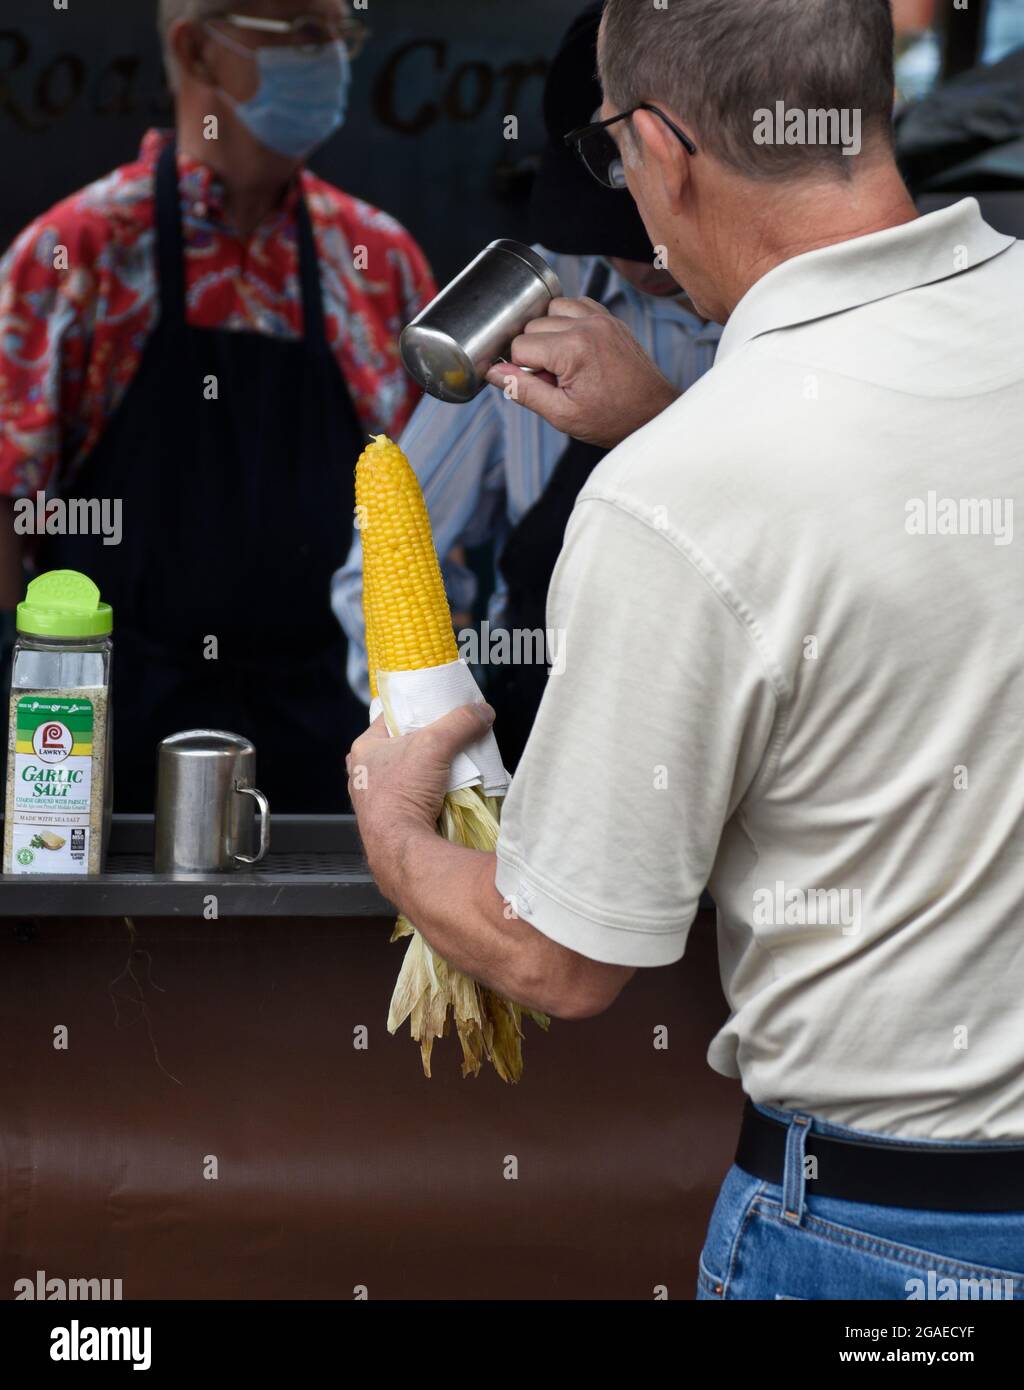 A man buys two ears of roasted corn-on-the-cob from a food stand at an outdoor festival in Santa Fe, New Mexico. Stock Photo